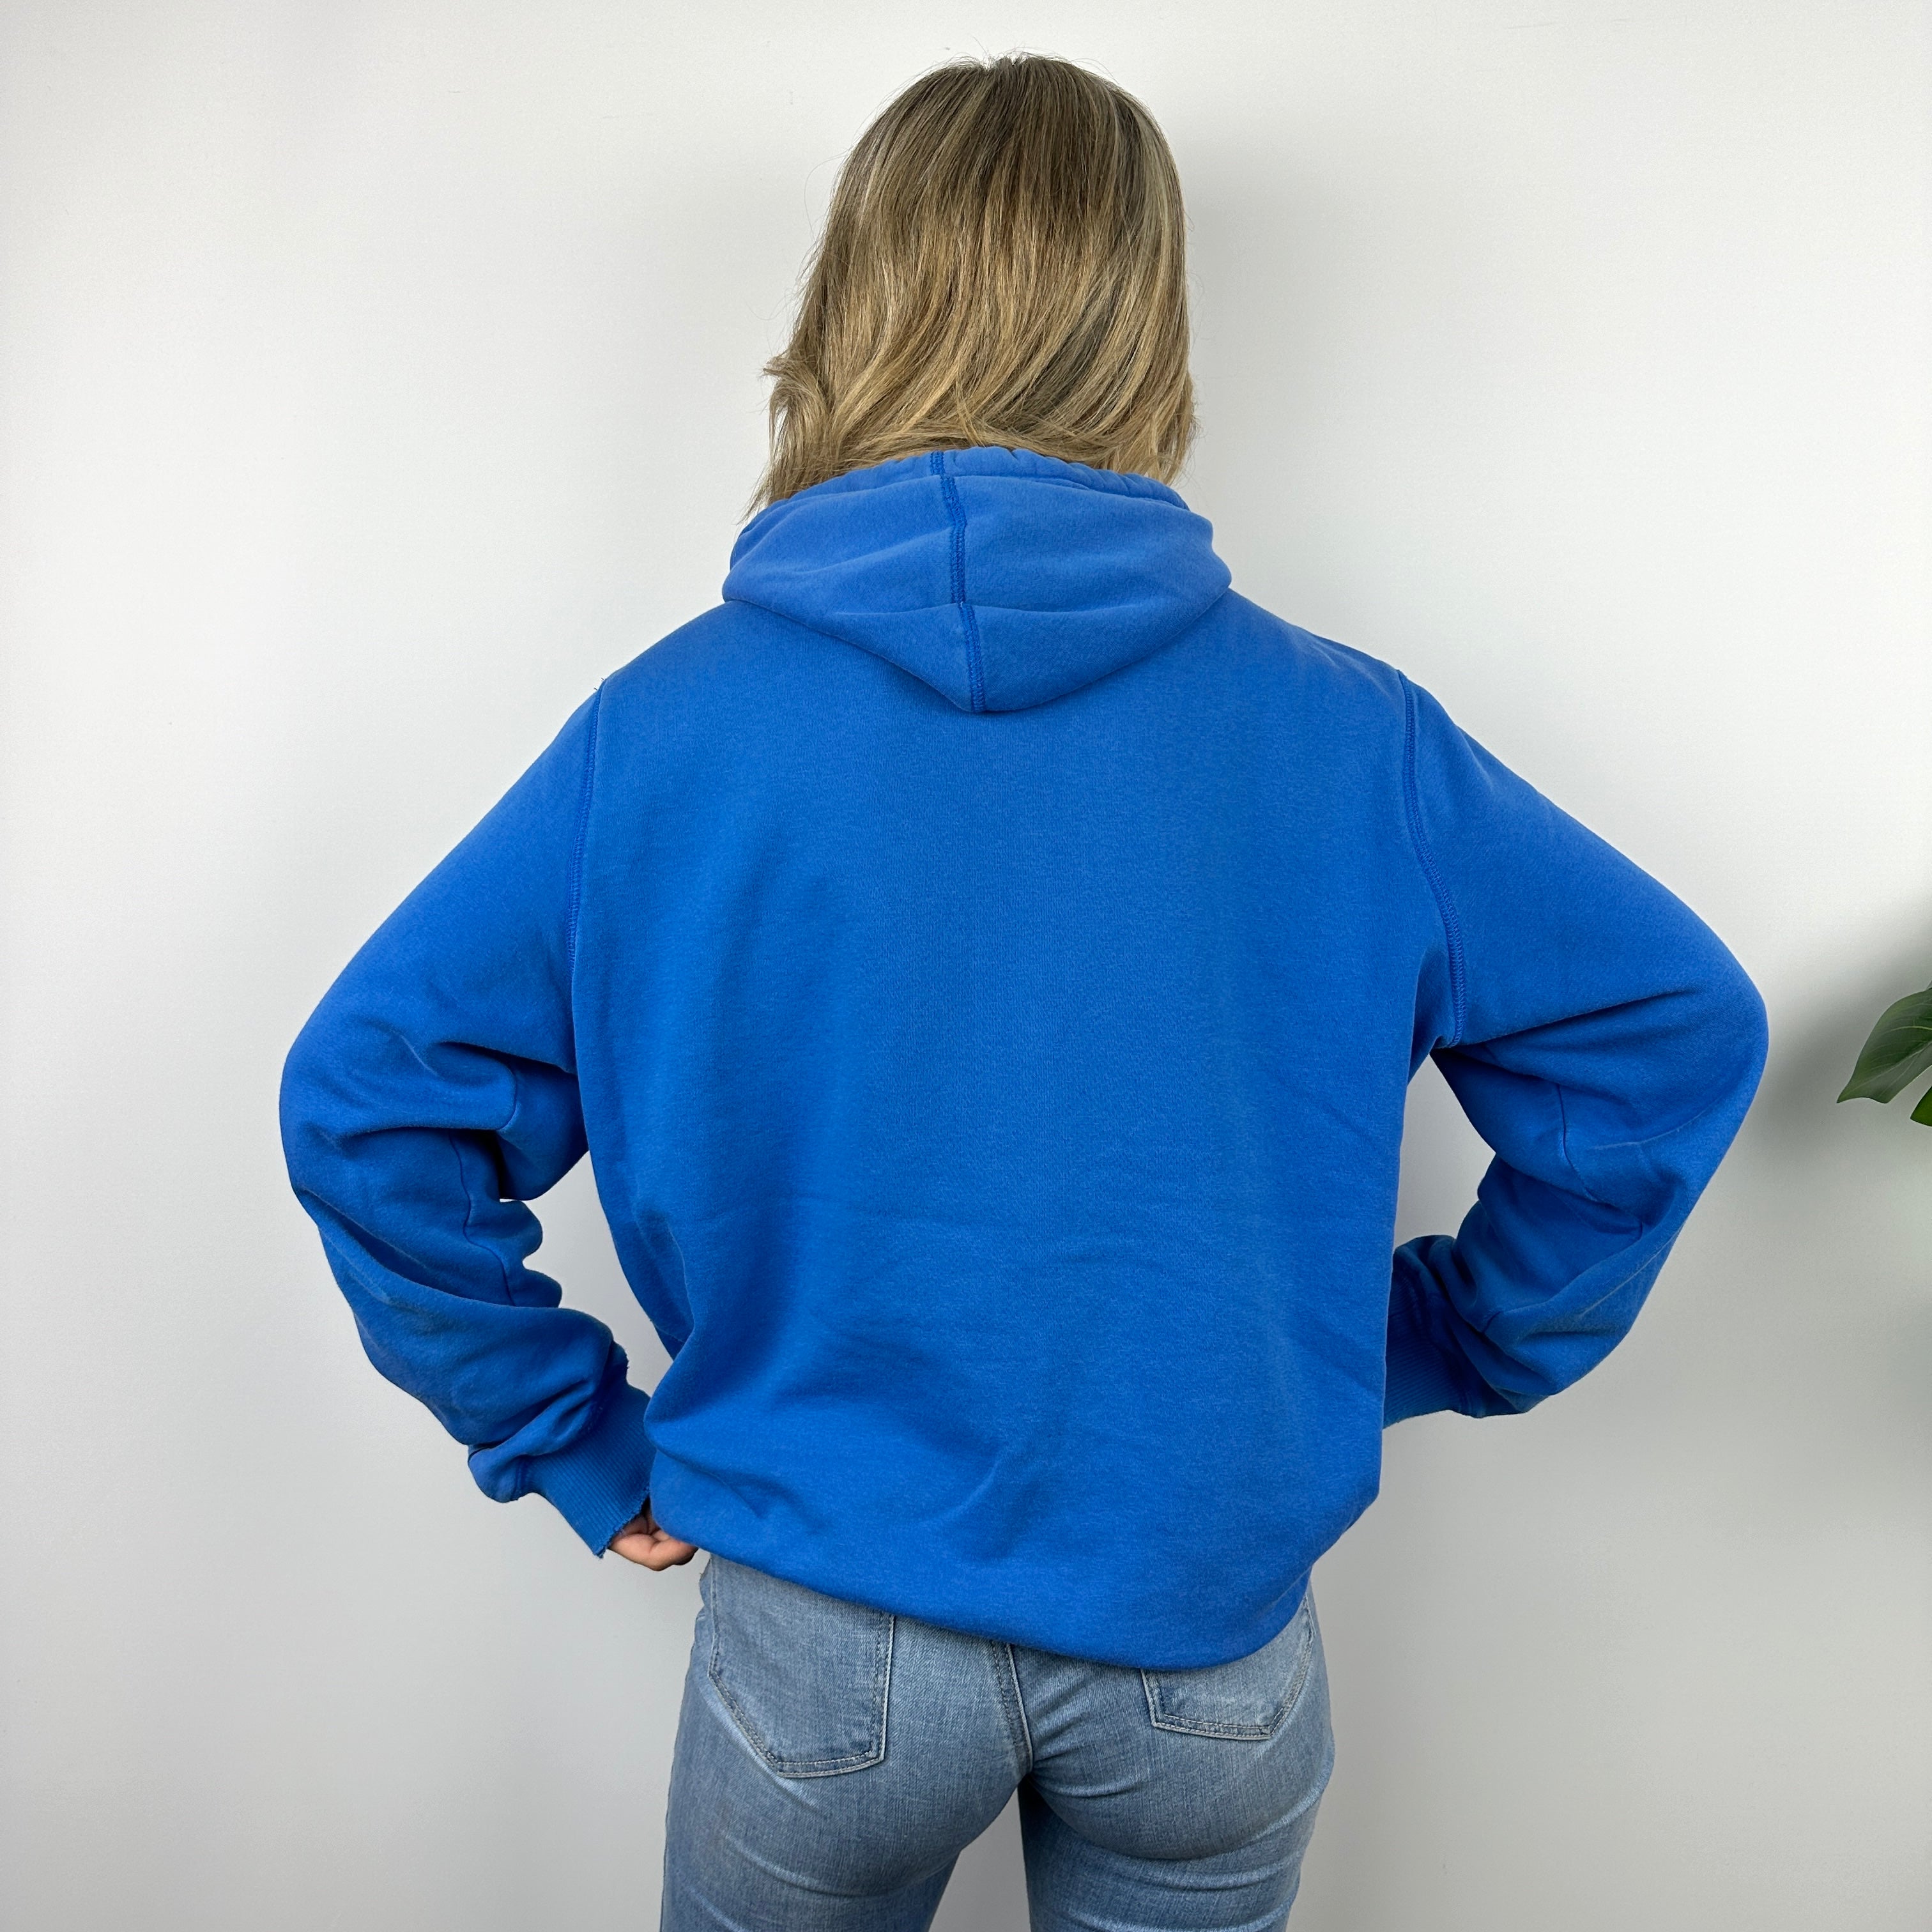 Nike Blue Embroidered Spell Out Zip Up Hoodie Jacket (L)